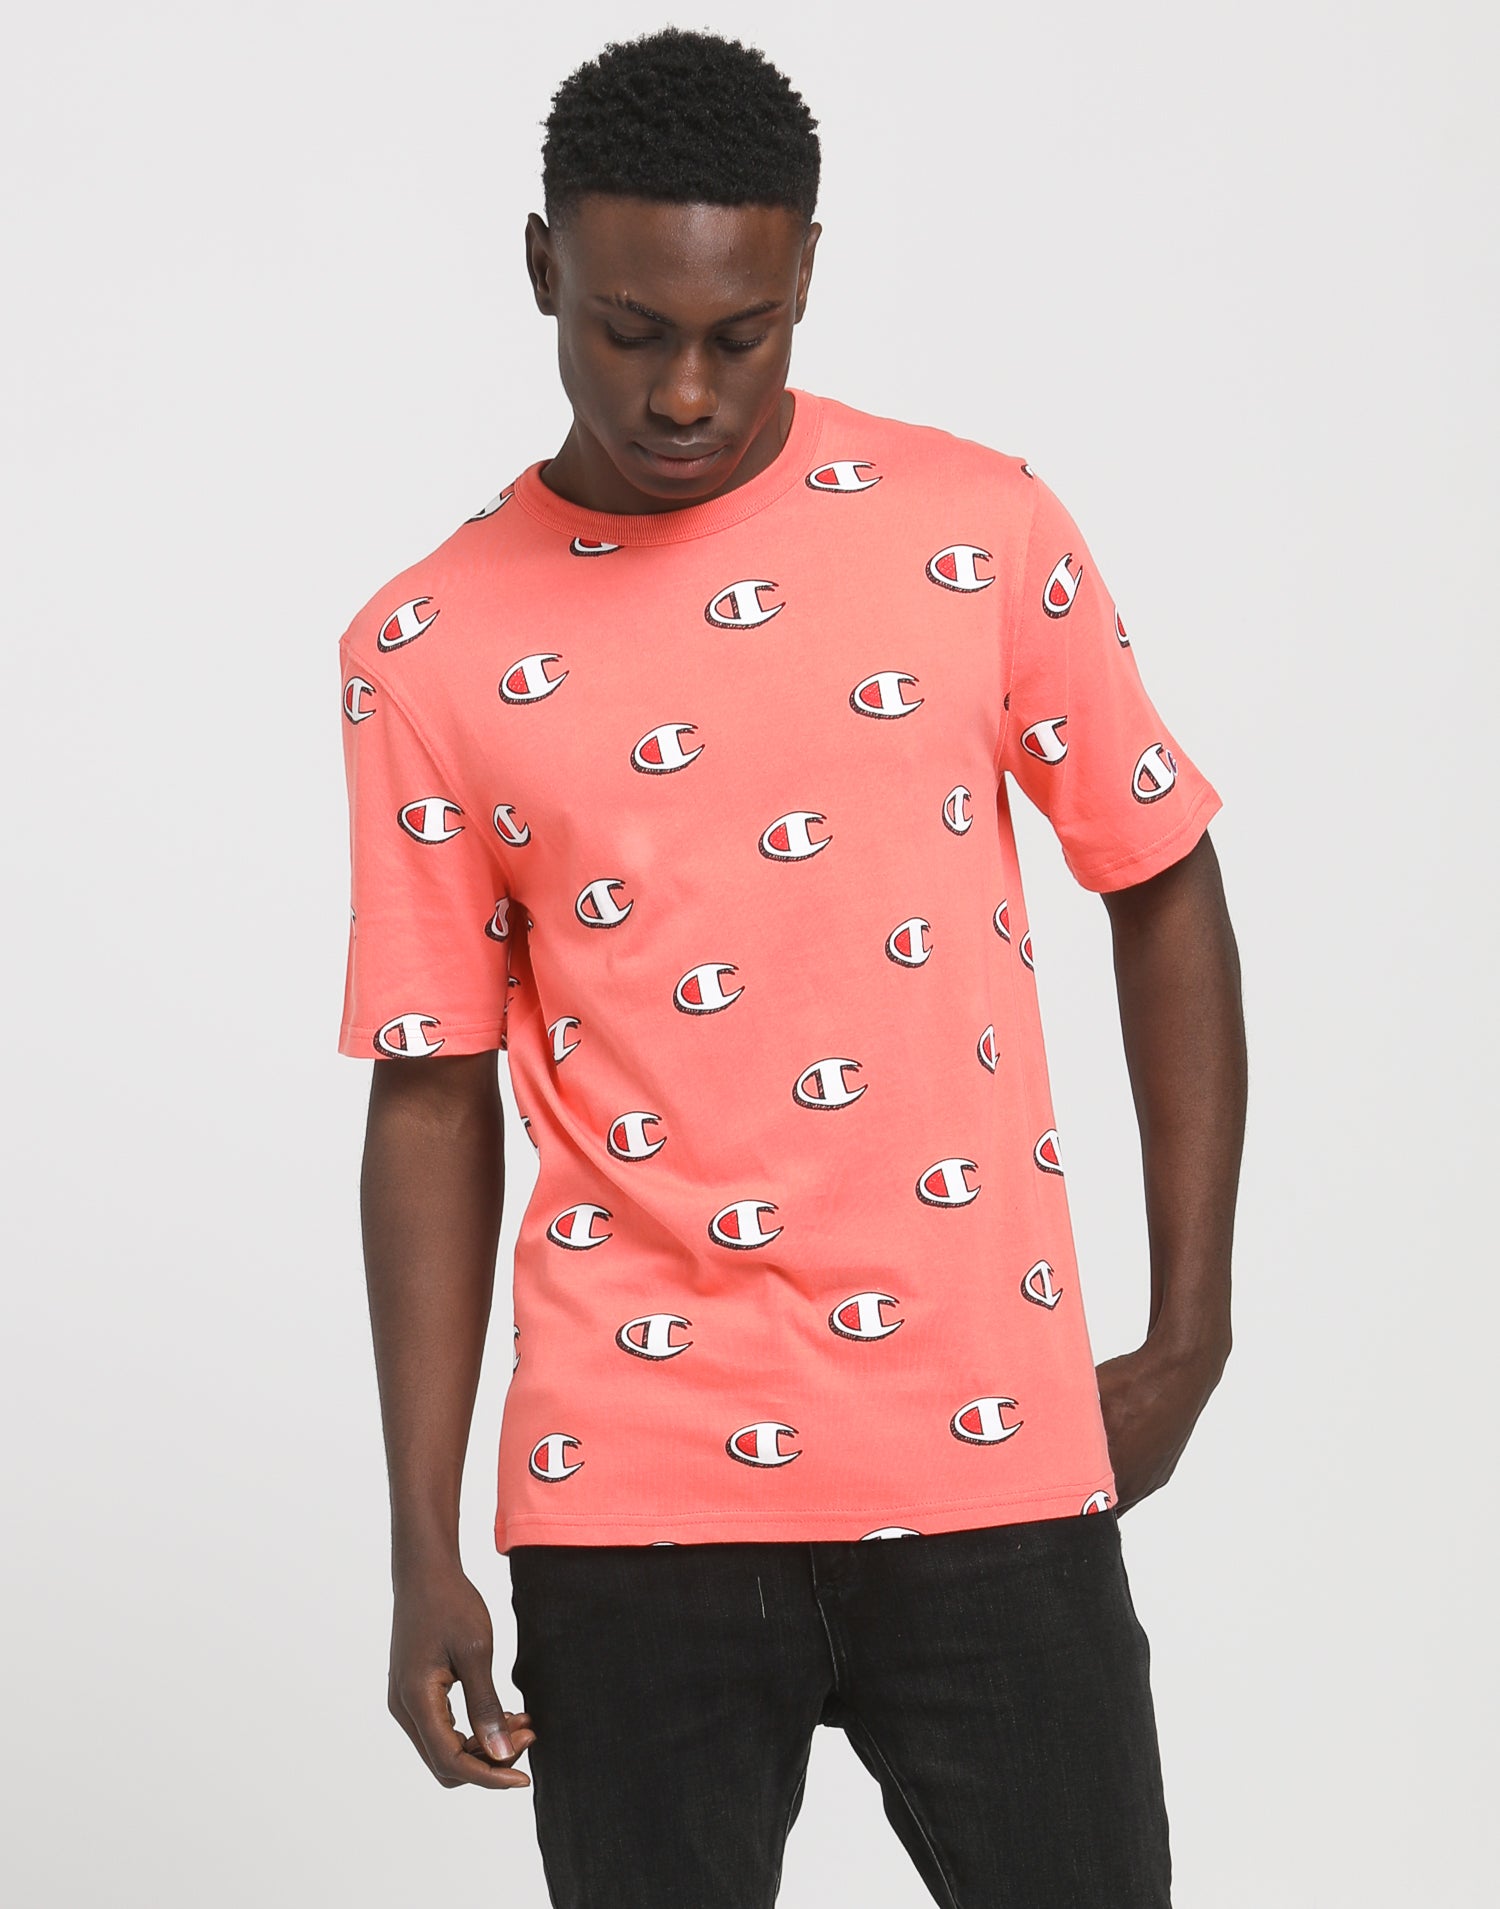 champion heritage all over print